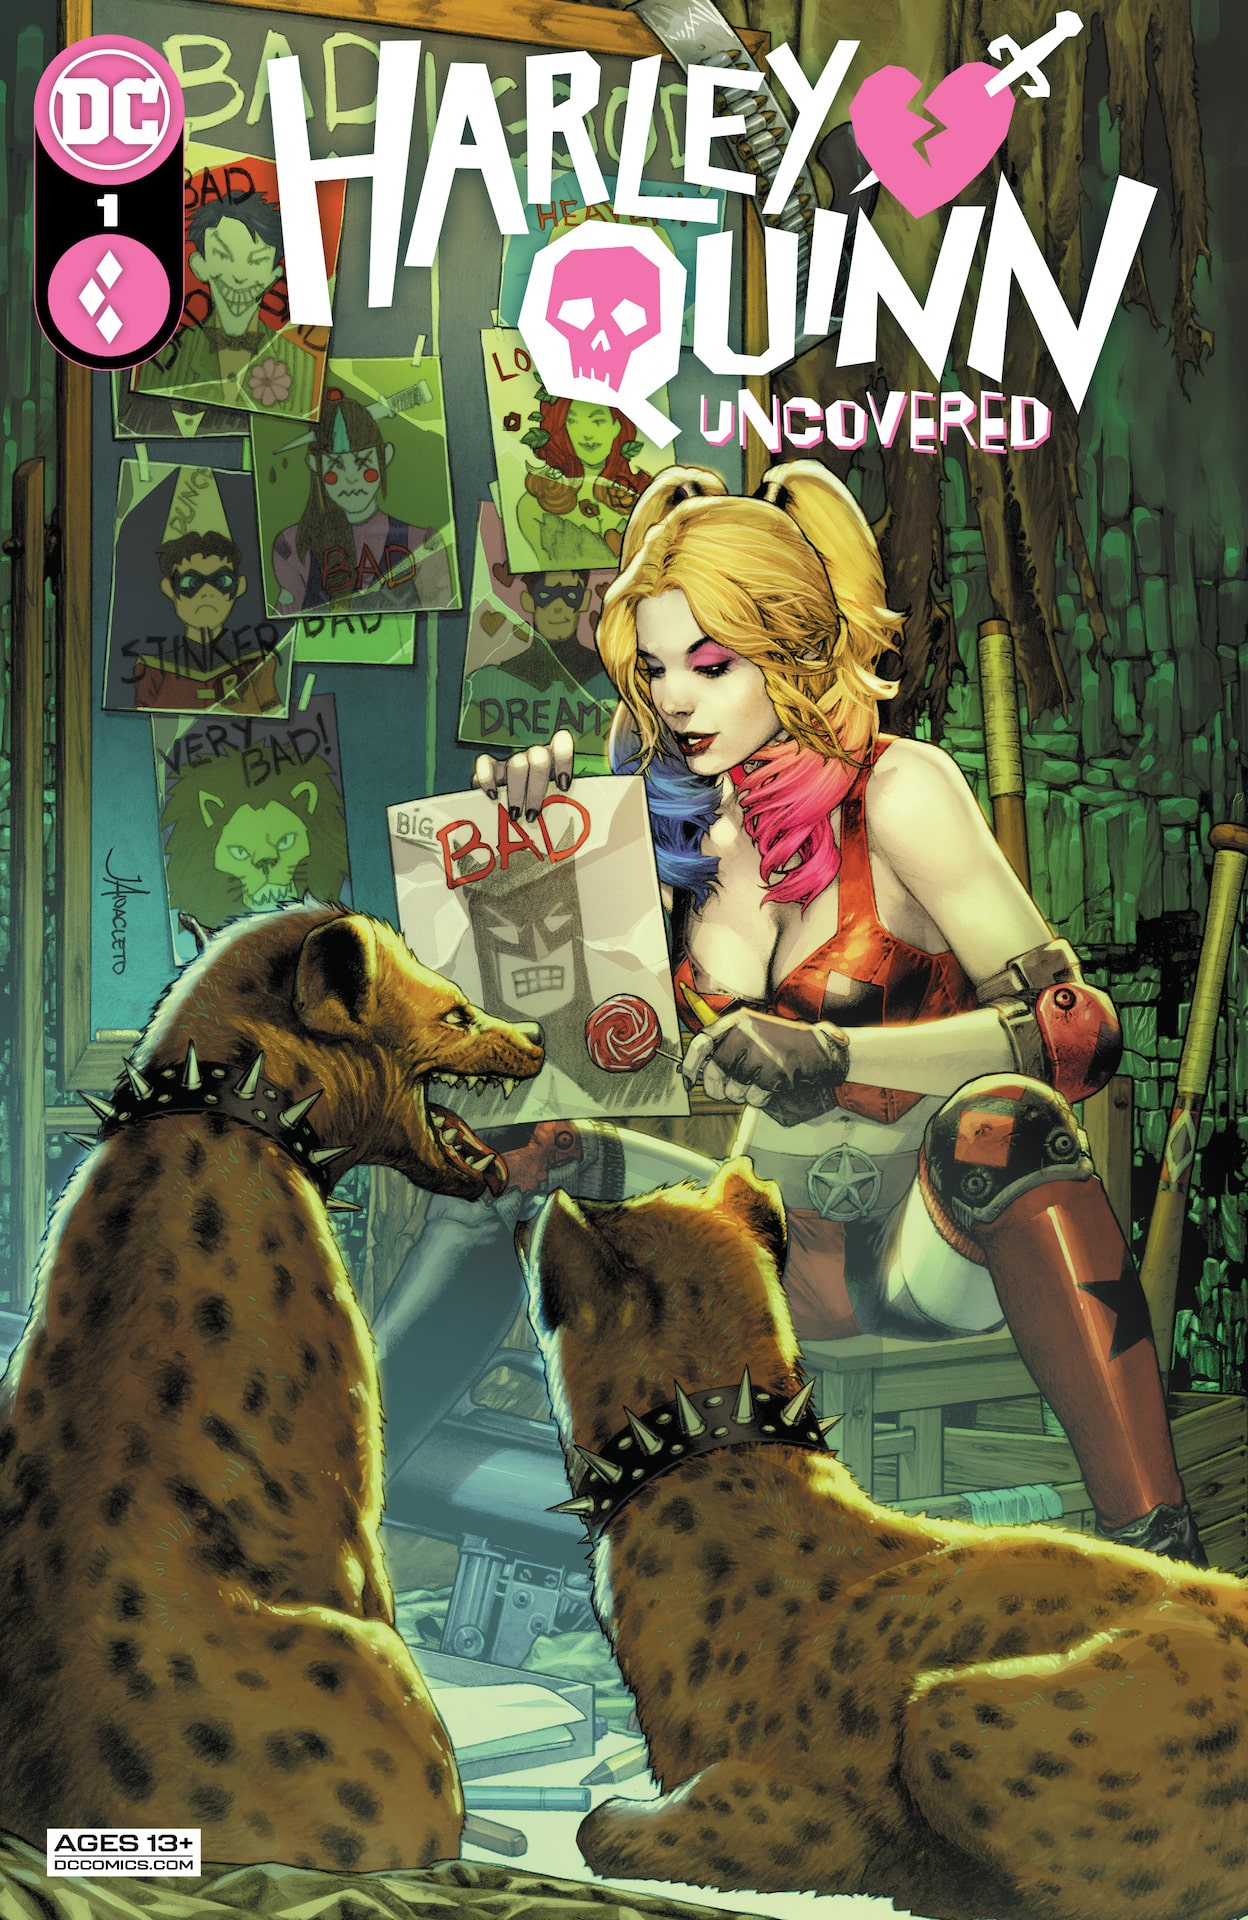 DC Preview: Harley Quinn: Uncovered #1